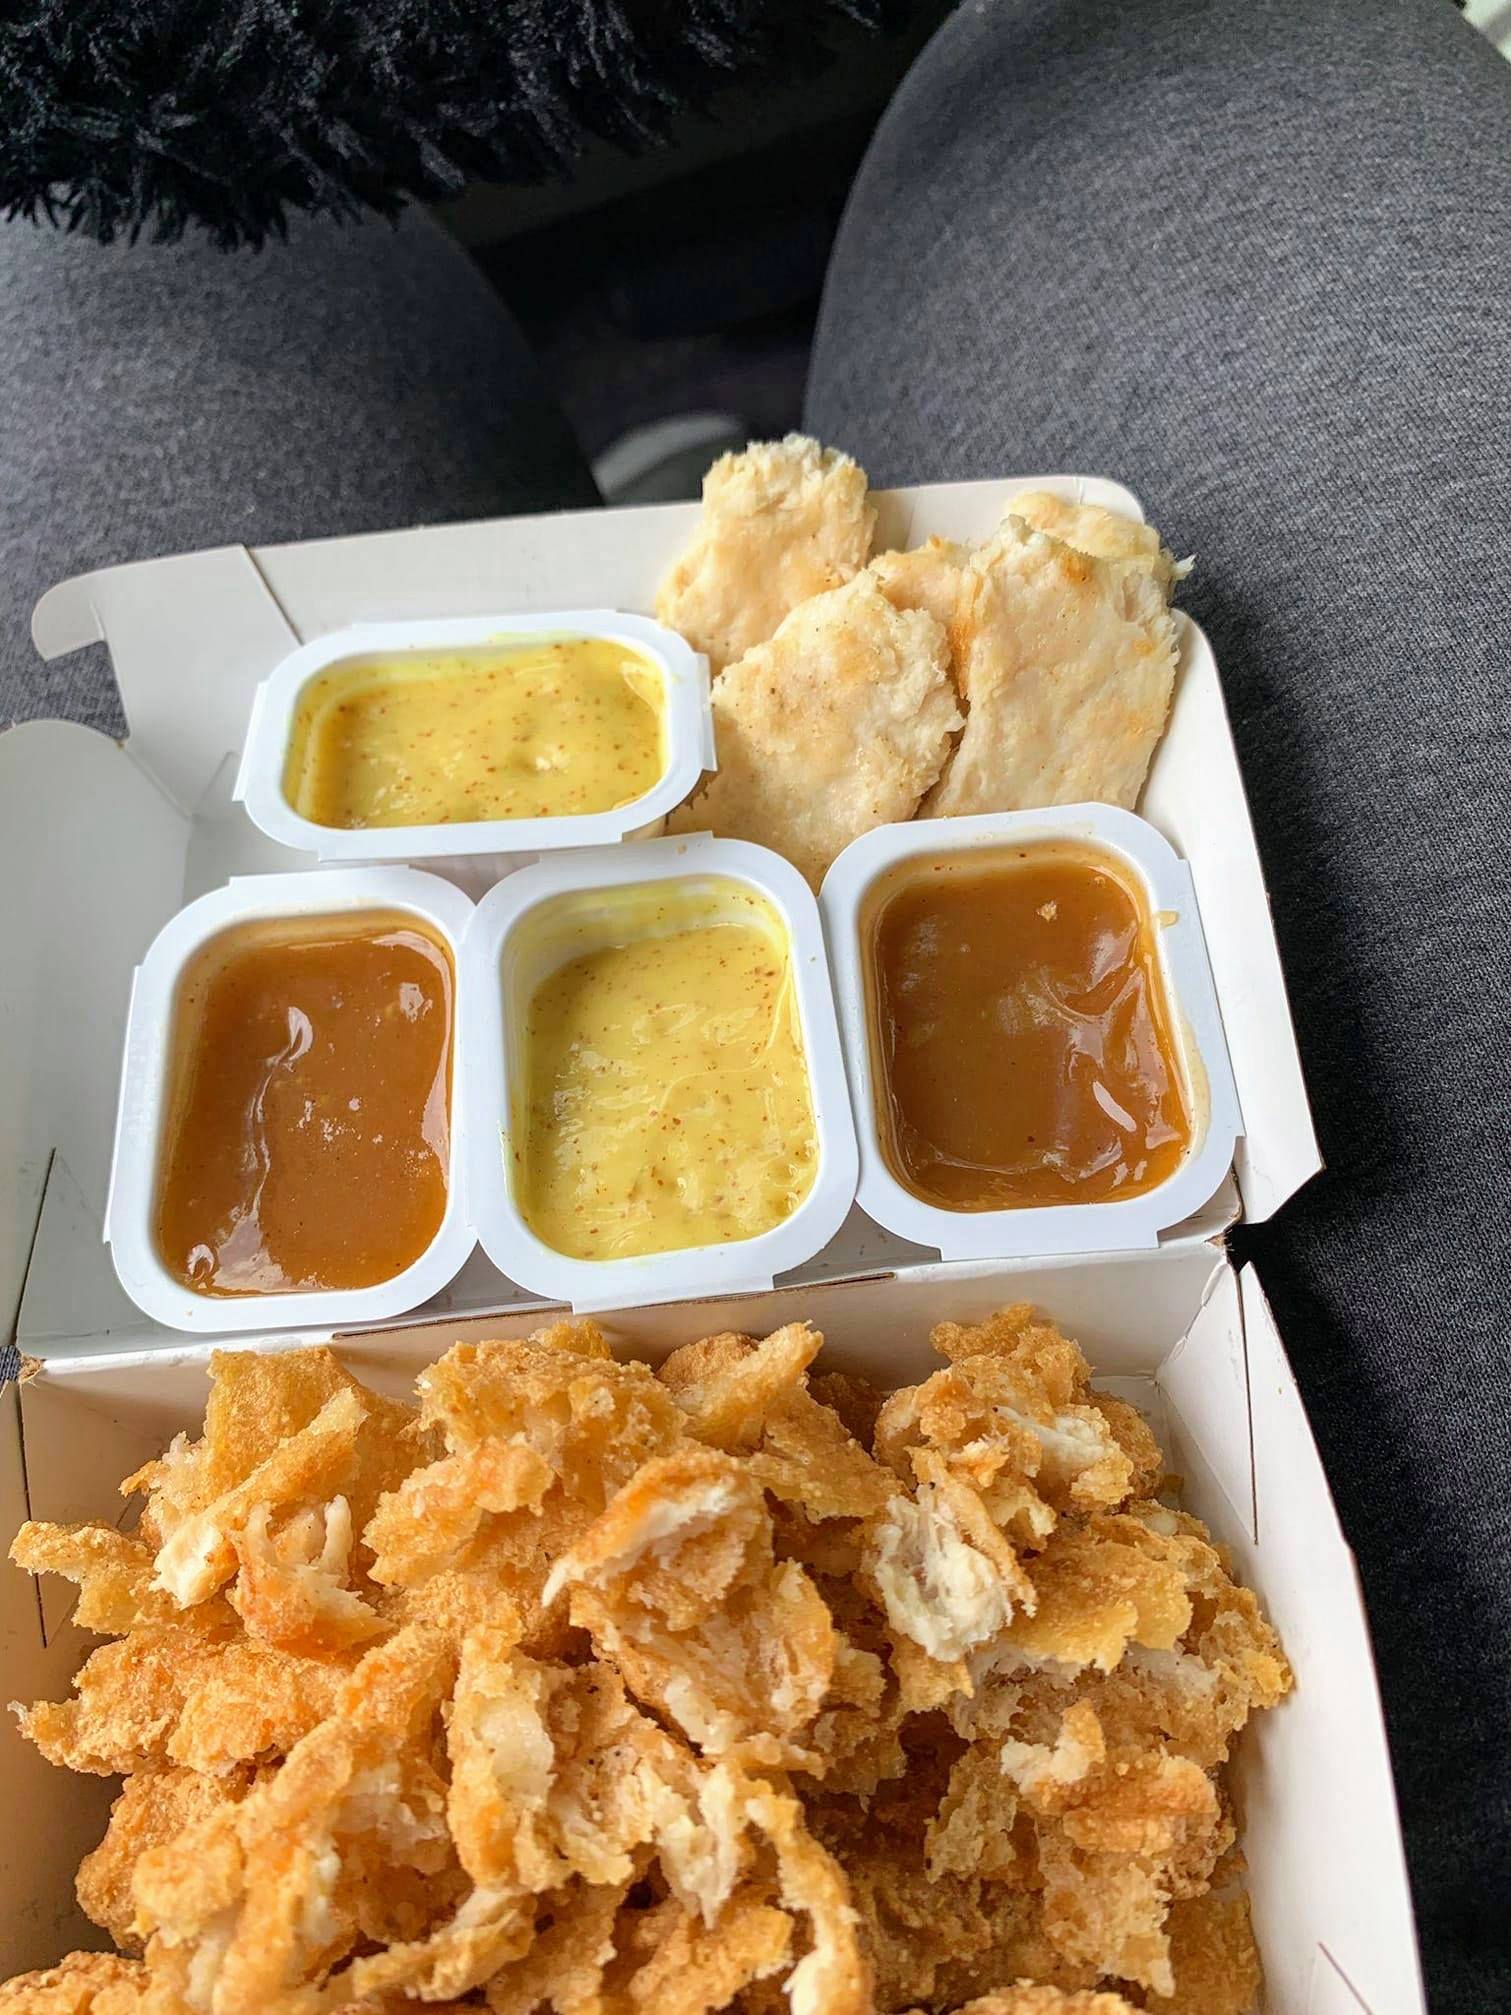 McDonald's Fans Are Horrified After Witnessing How This Man Consumes His Chicken McNuggets